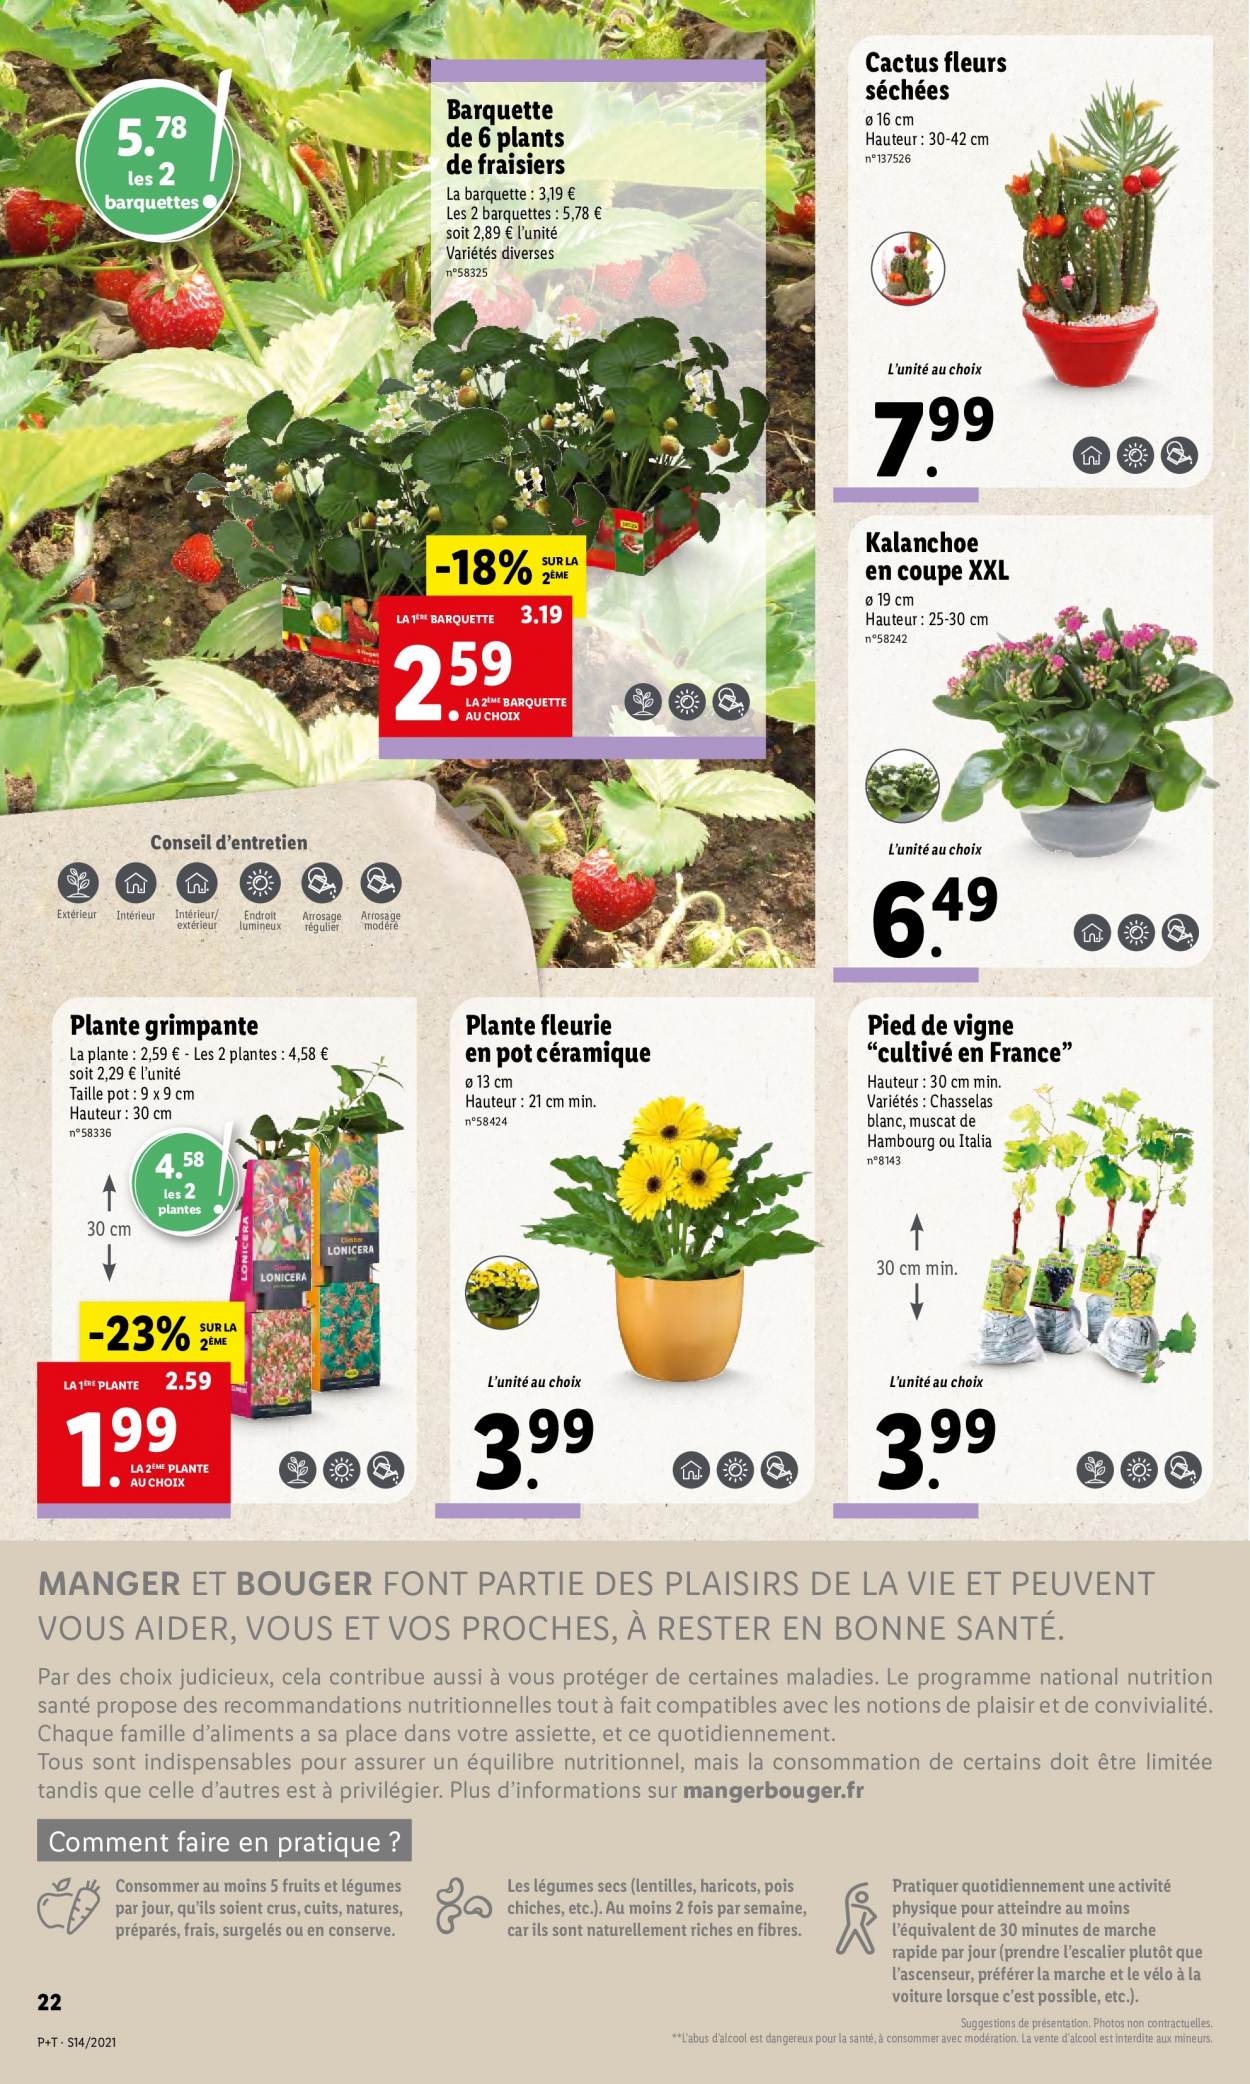 Catalogue Lidl - 07.04.2021 - 13.04.2021. Page 24.